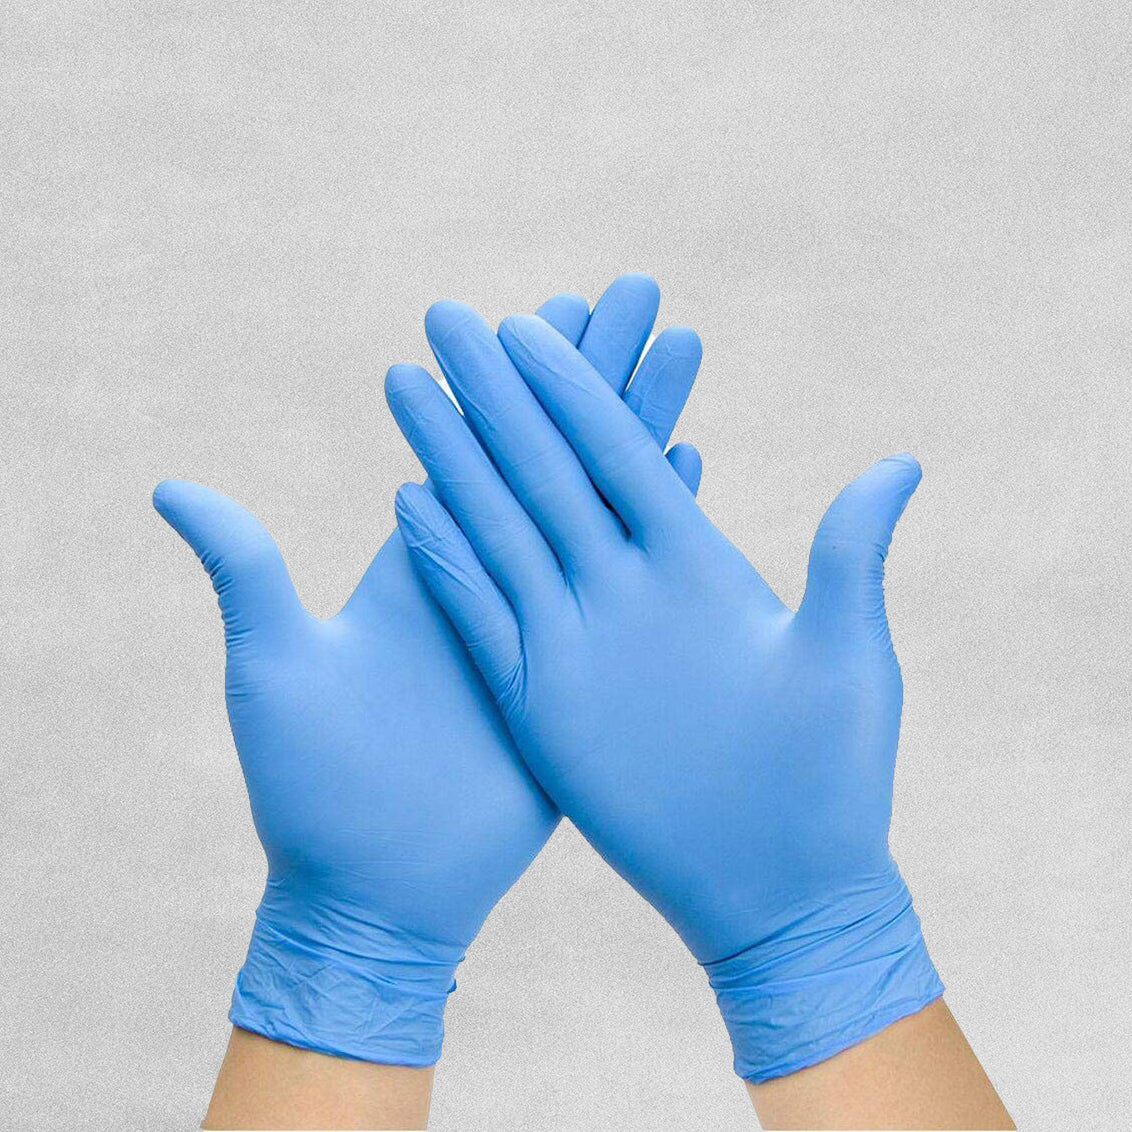 Traffi TD02 Tri-Polymer Disposable Gloves - Pack of 100 - Bulk Deals Available